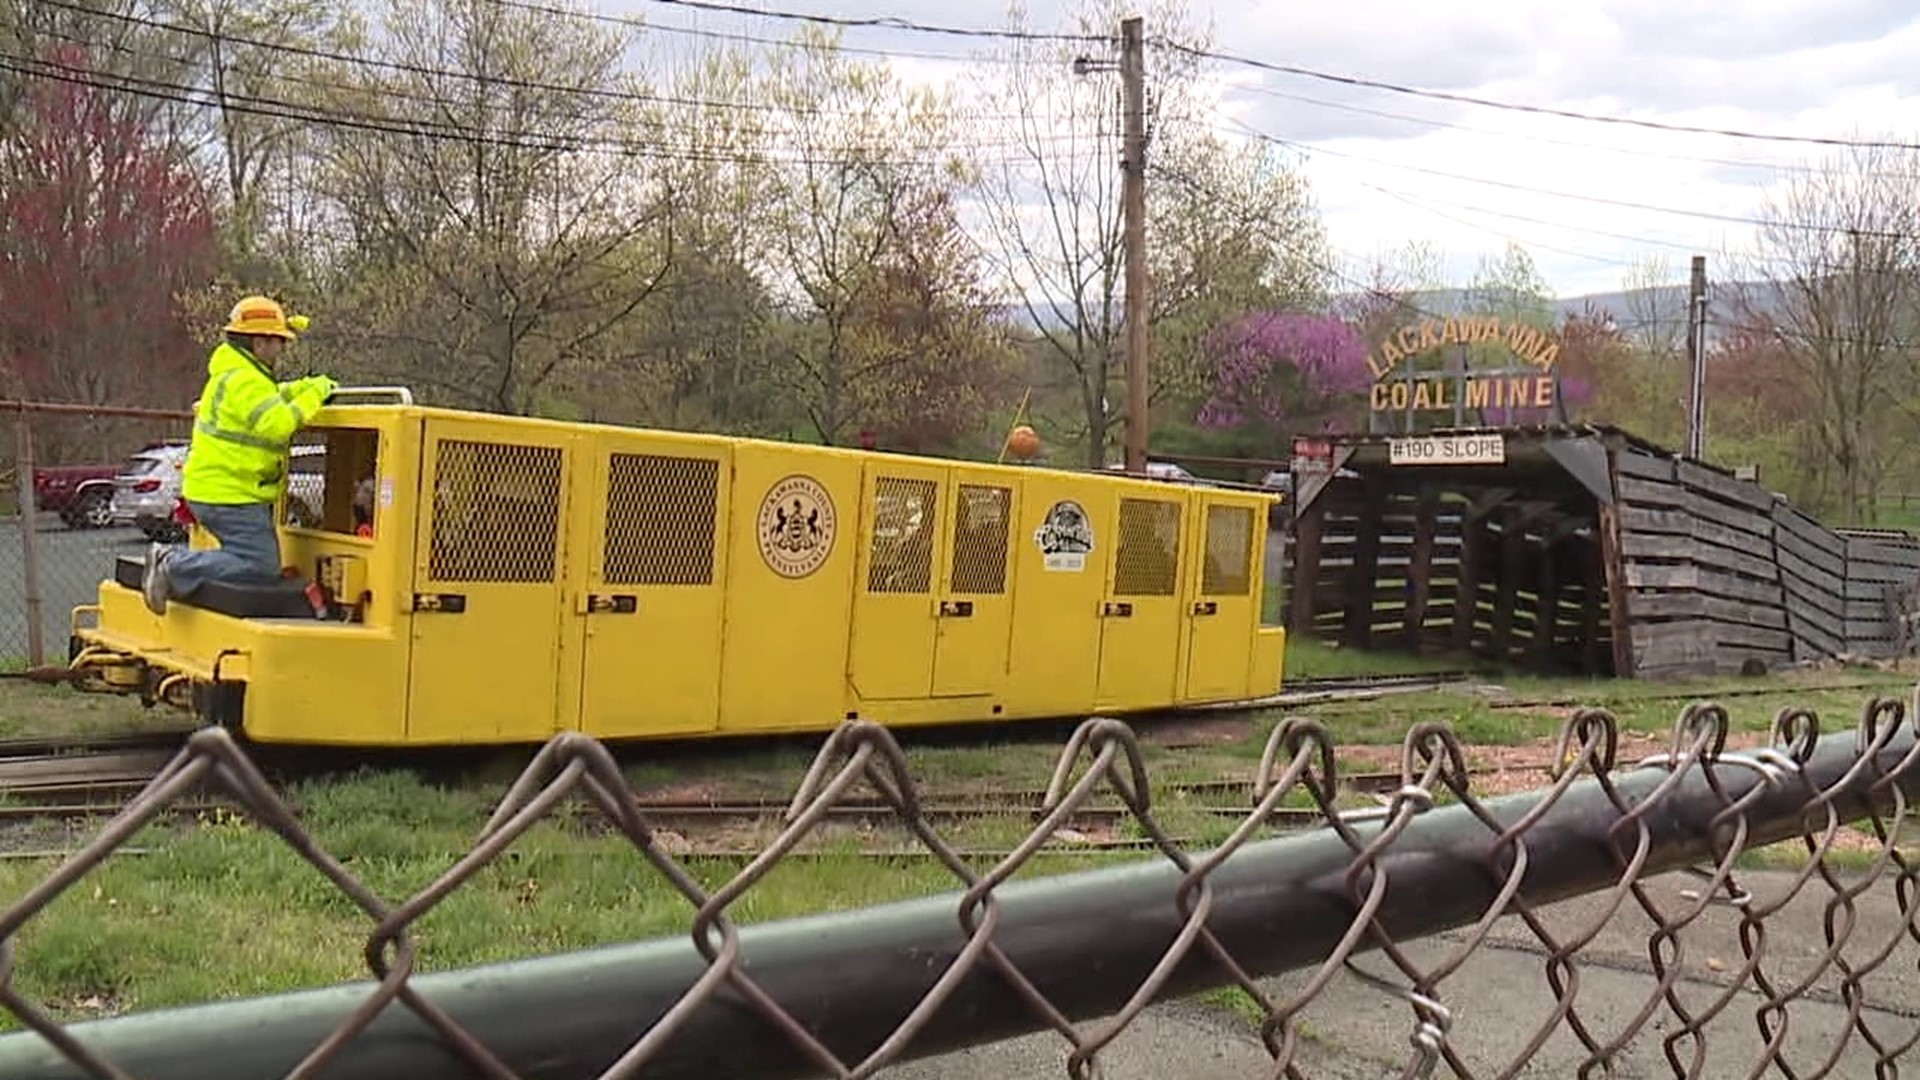 The Lackawanna County Coal Mine Tour closed Saturday for emergency repairs to the mine car, according to county officials.